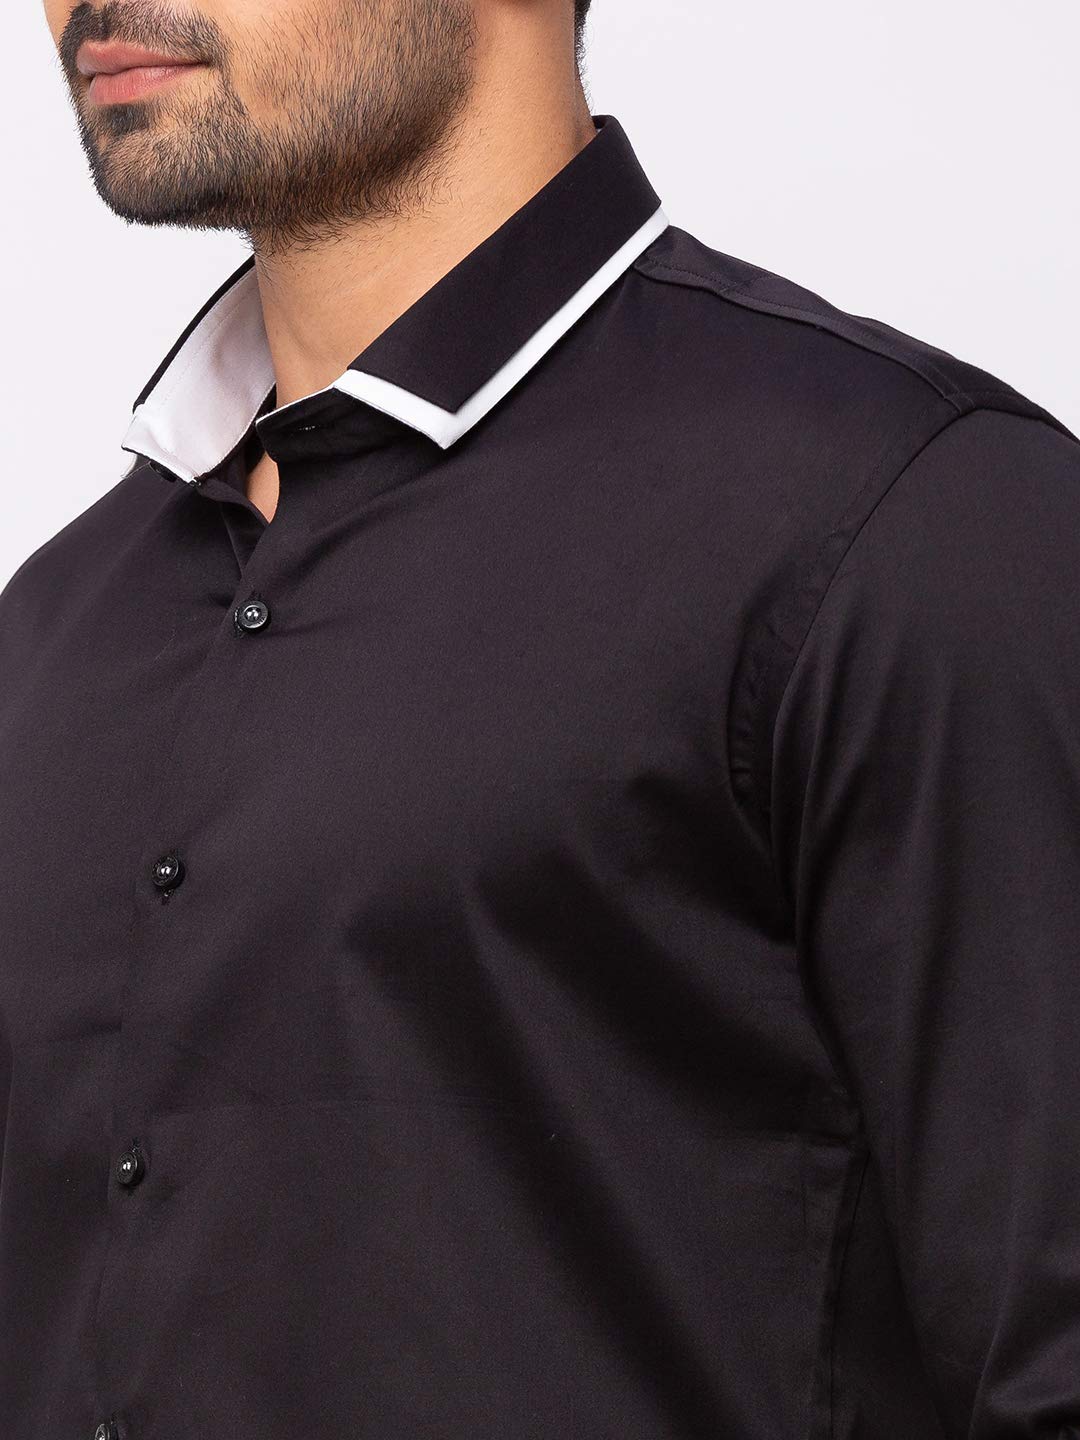 Black Double Collared Casual Shirt